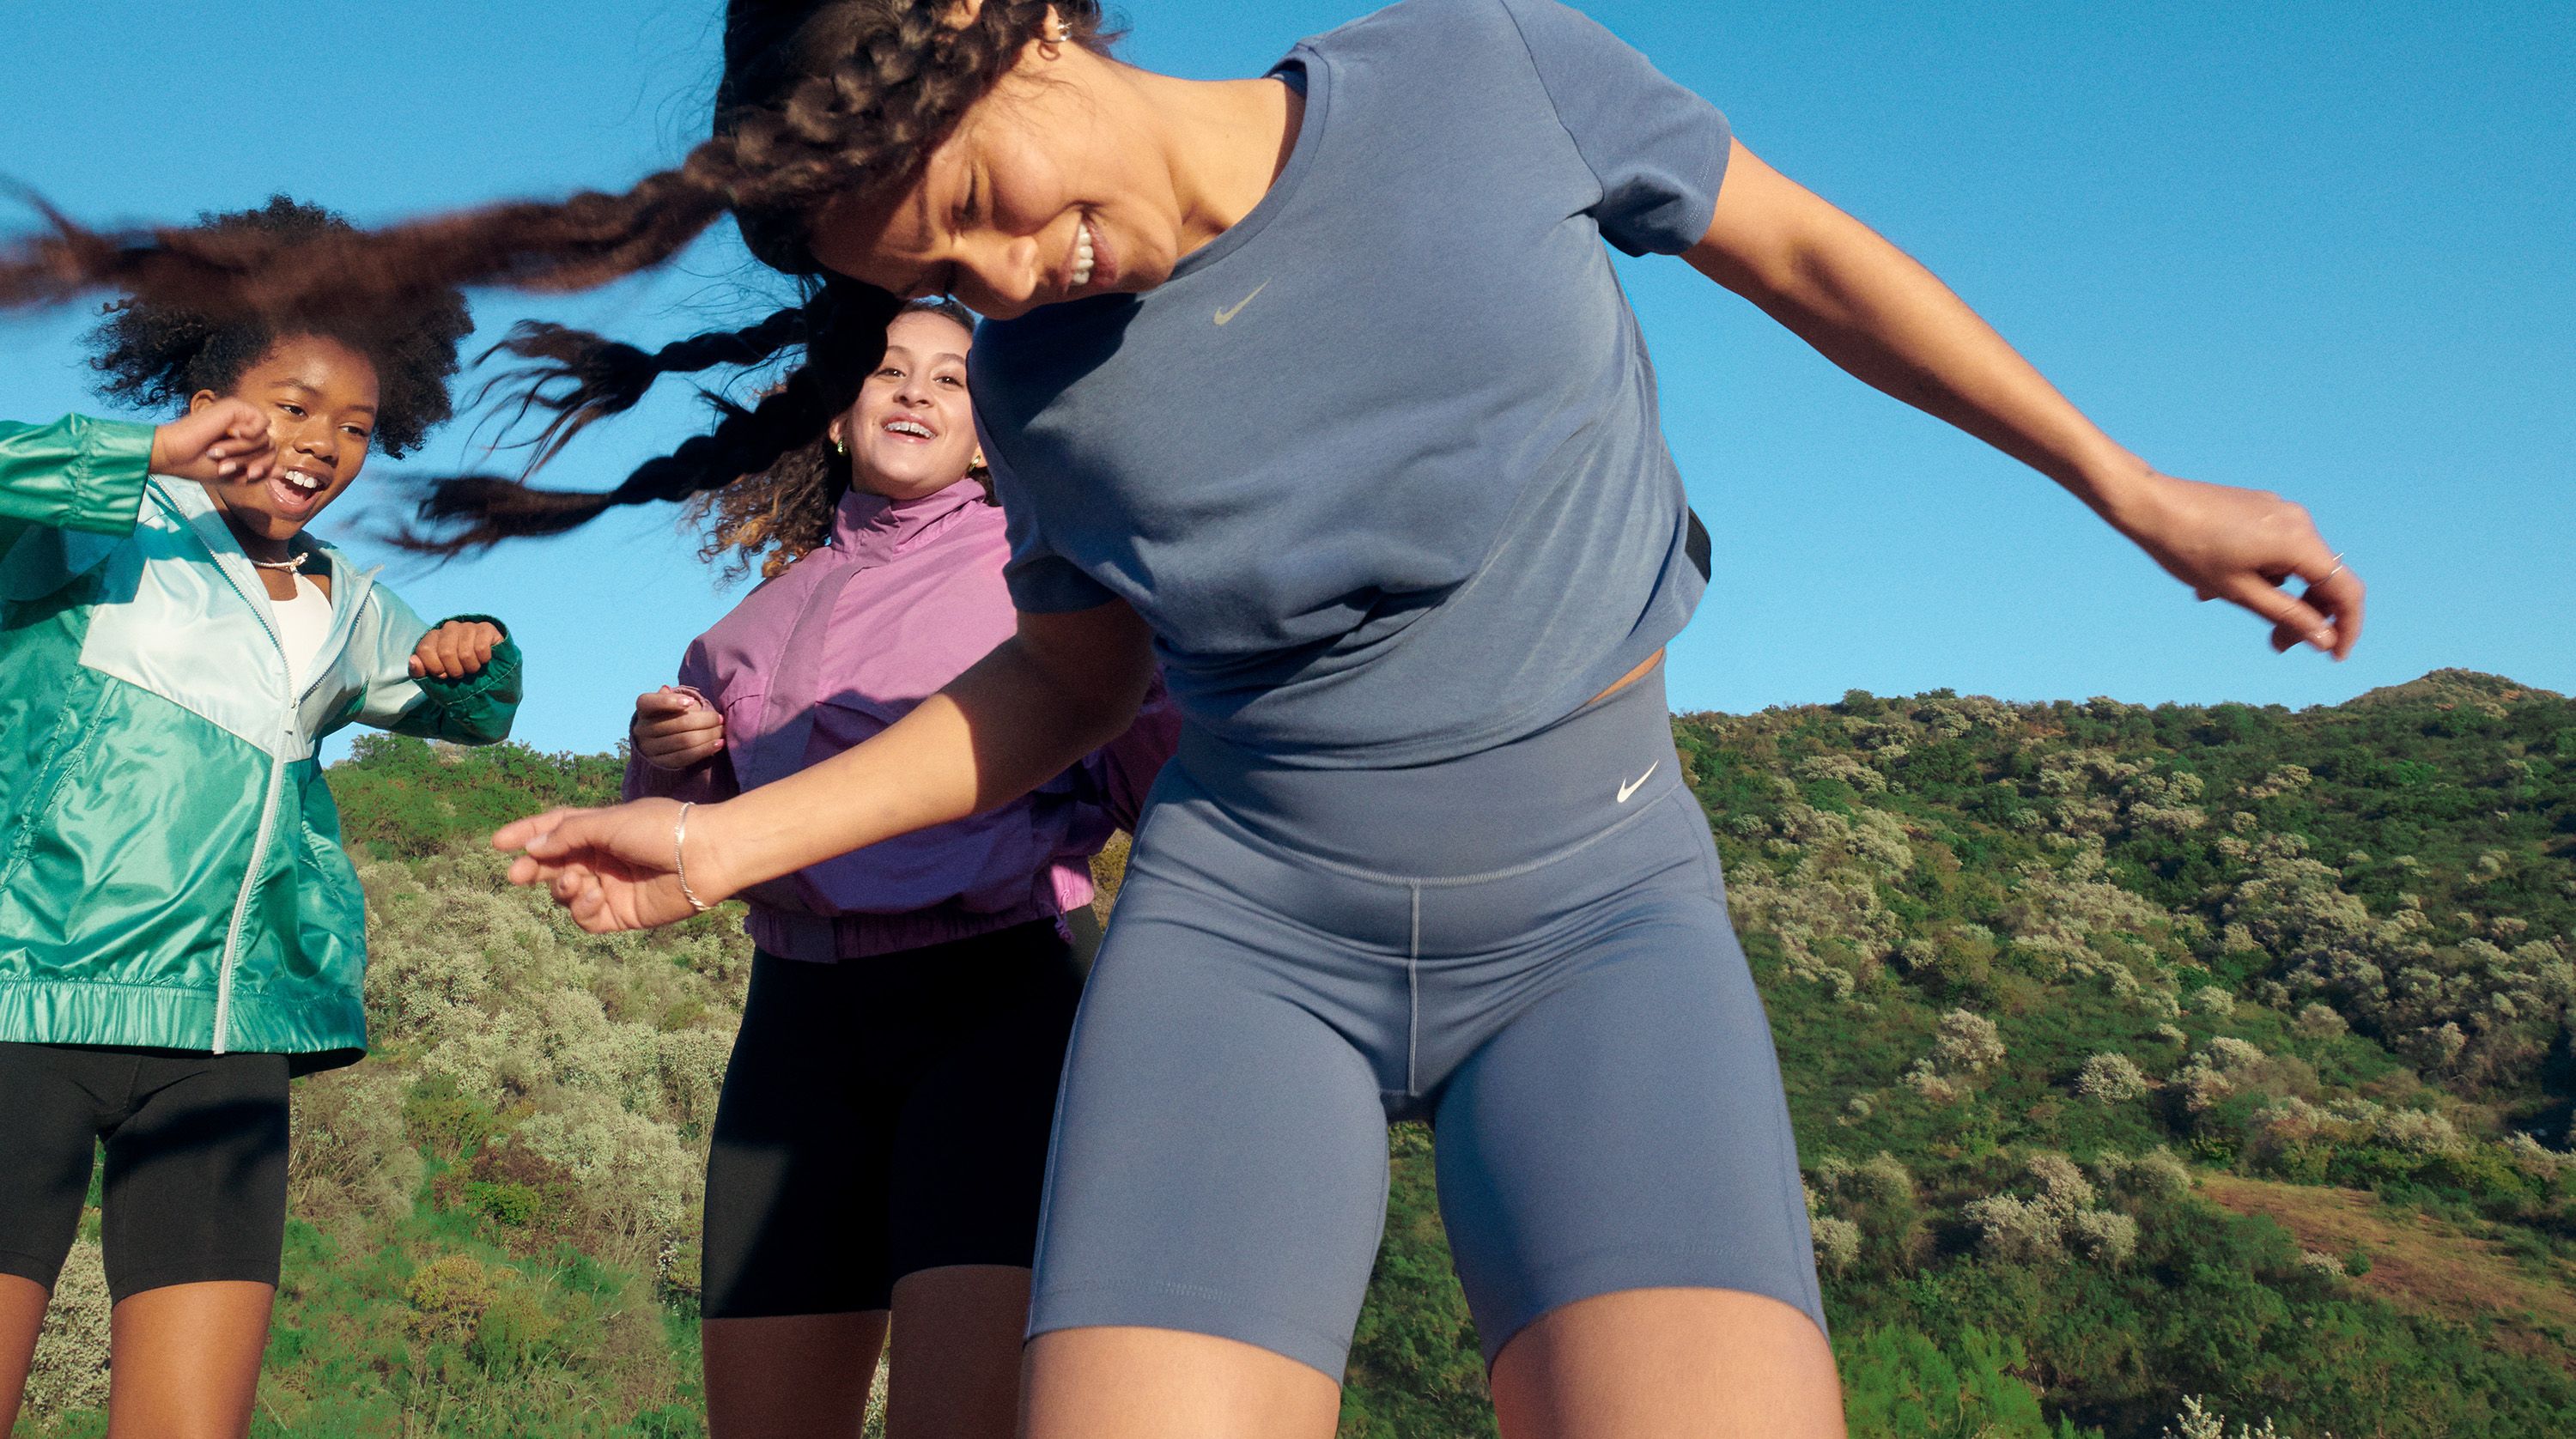 Nike's Best Athletic Shorts of 2023 Are Period-Proof